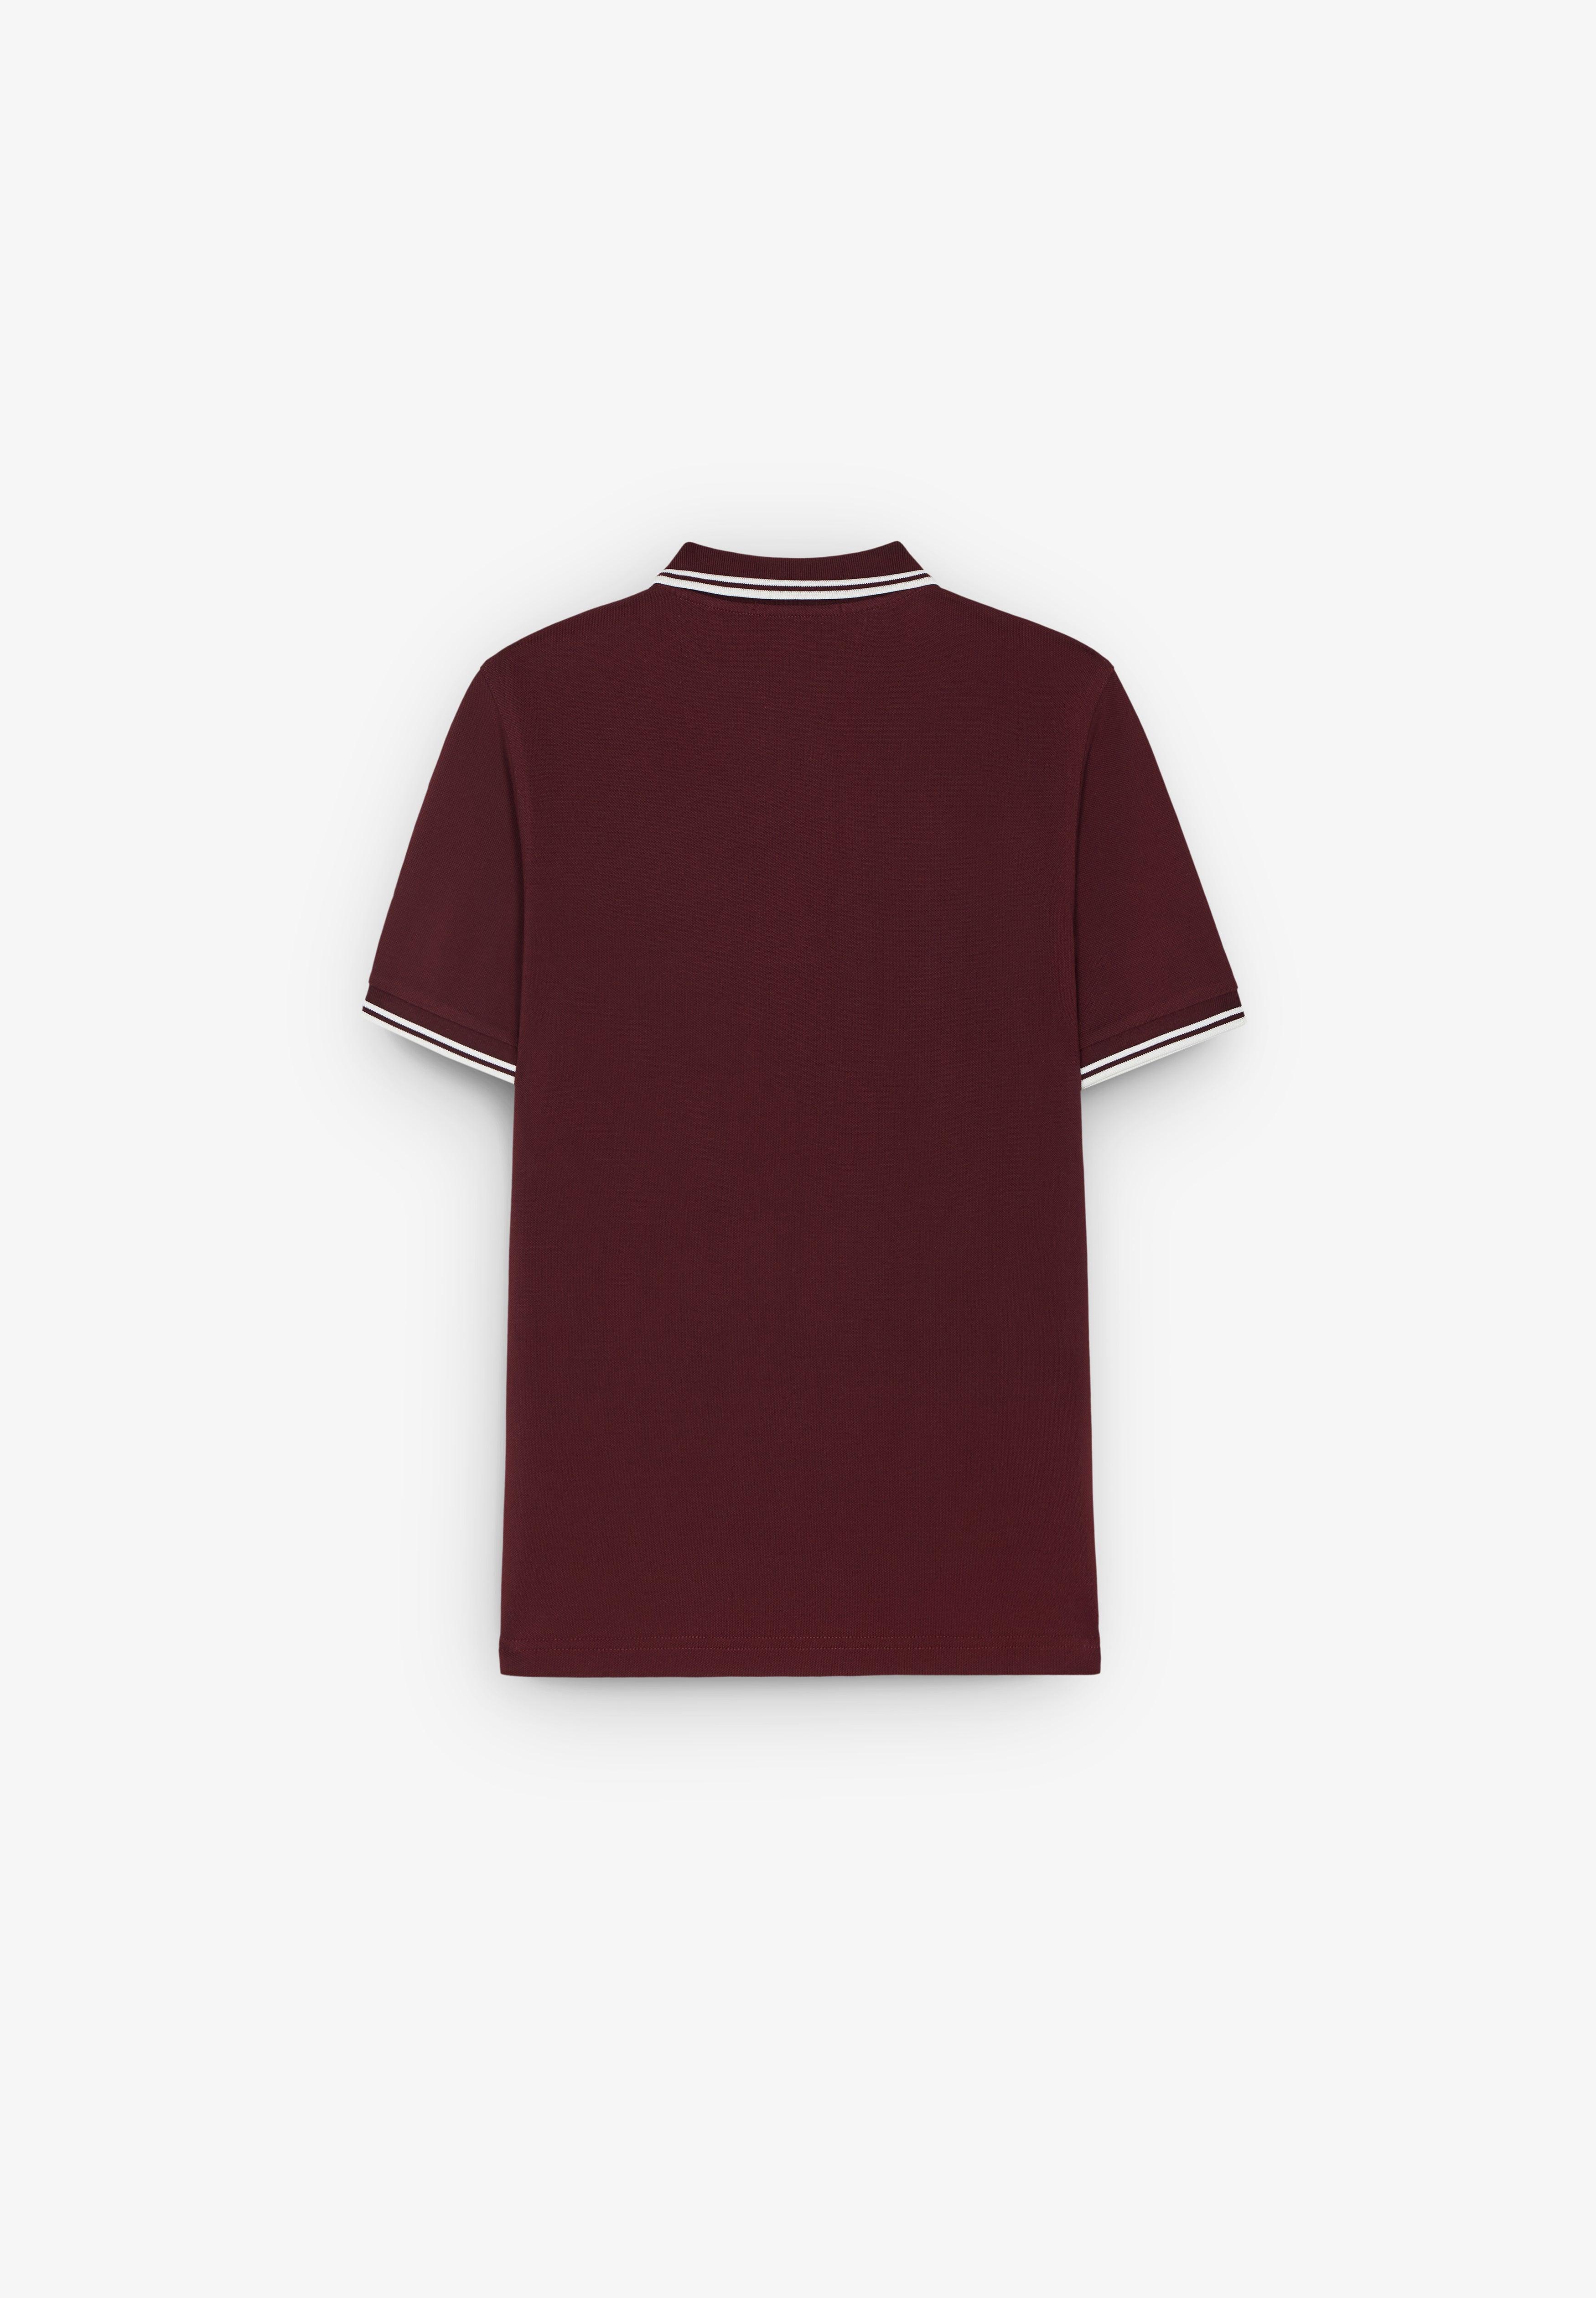 FRED PERRY | TWIN TIPPED FRED PERRY SHIRT